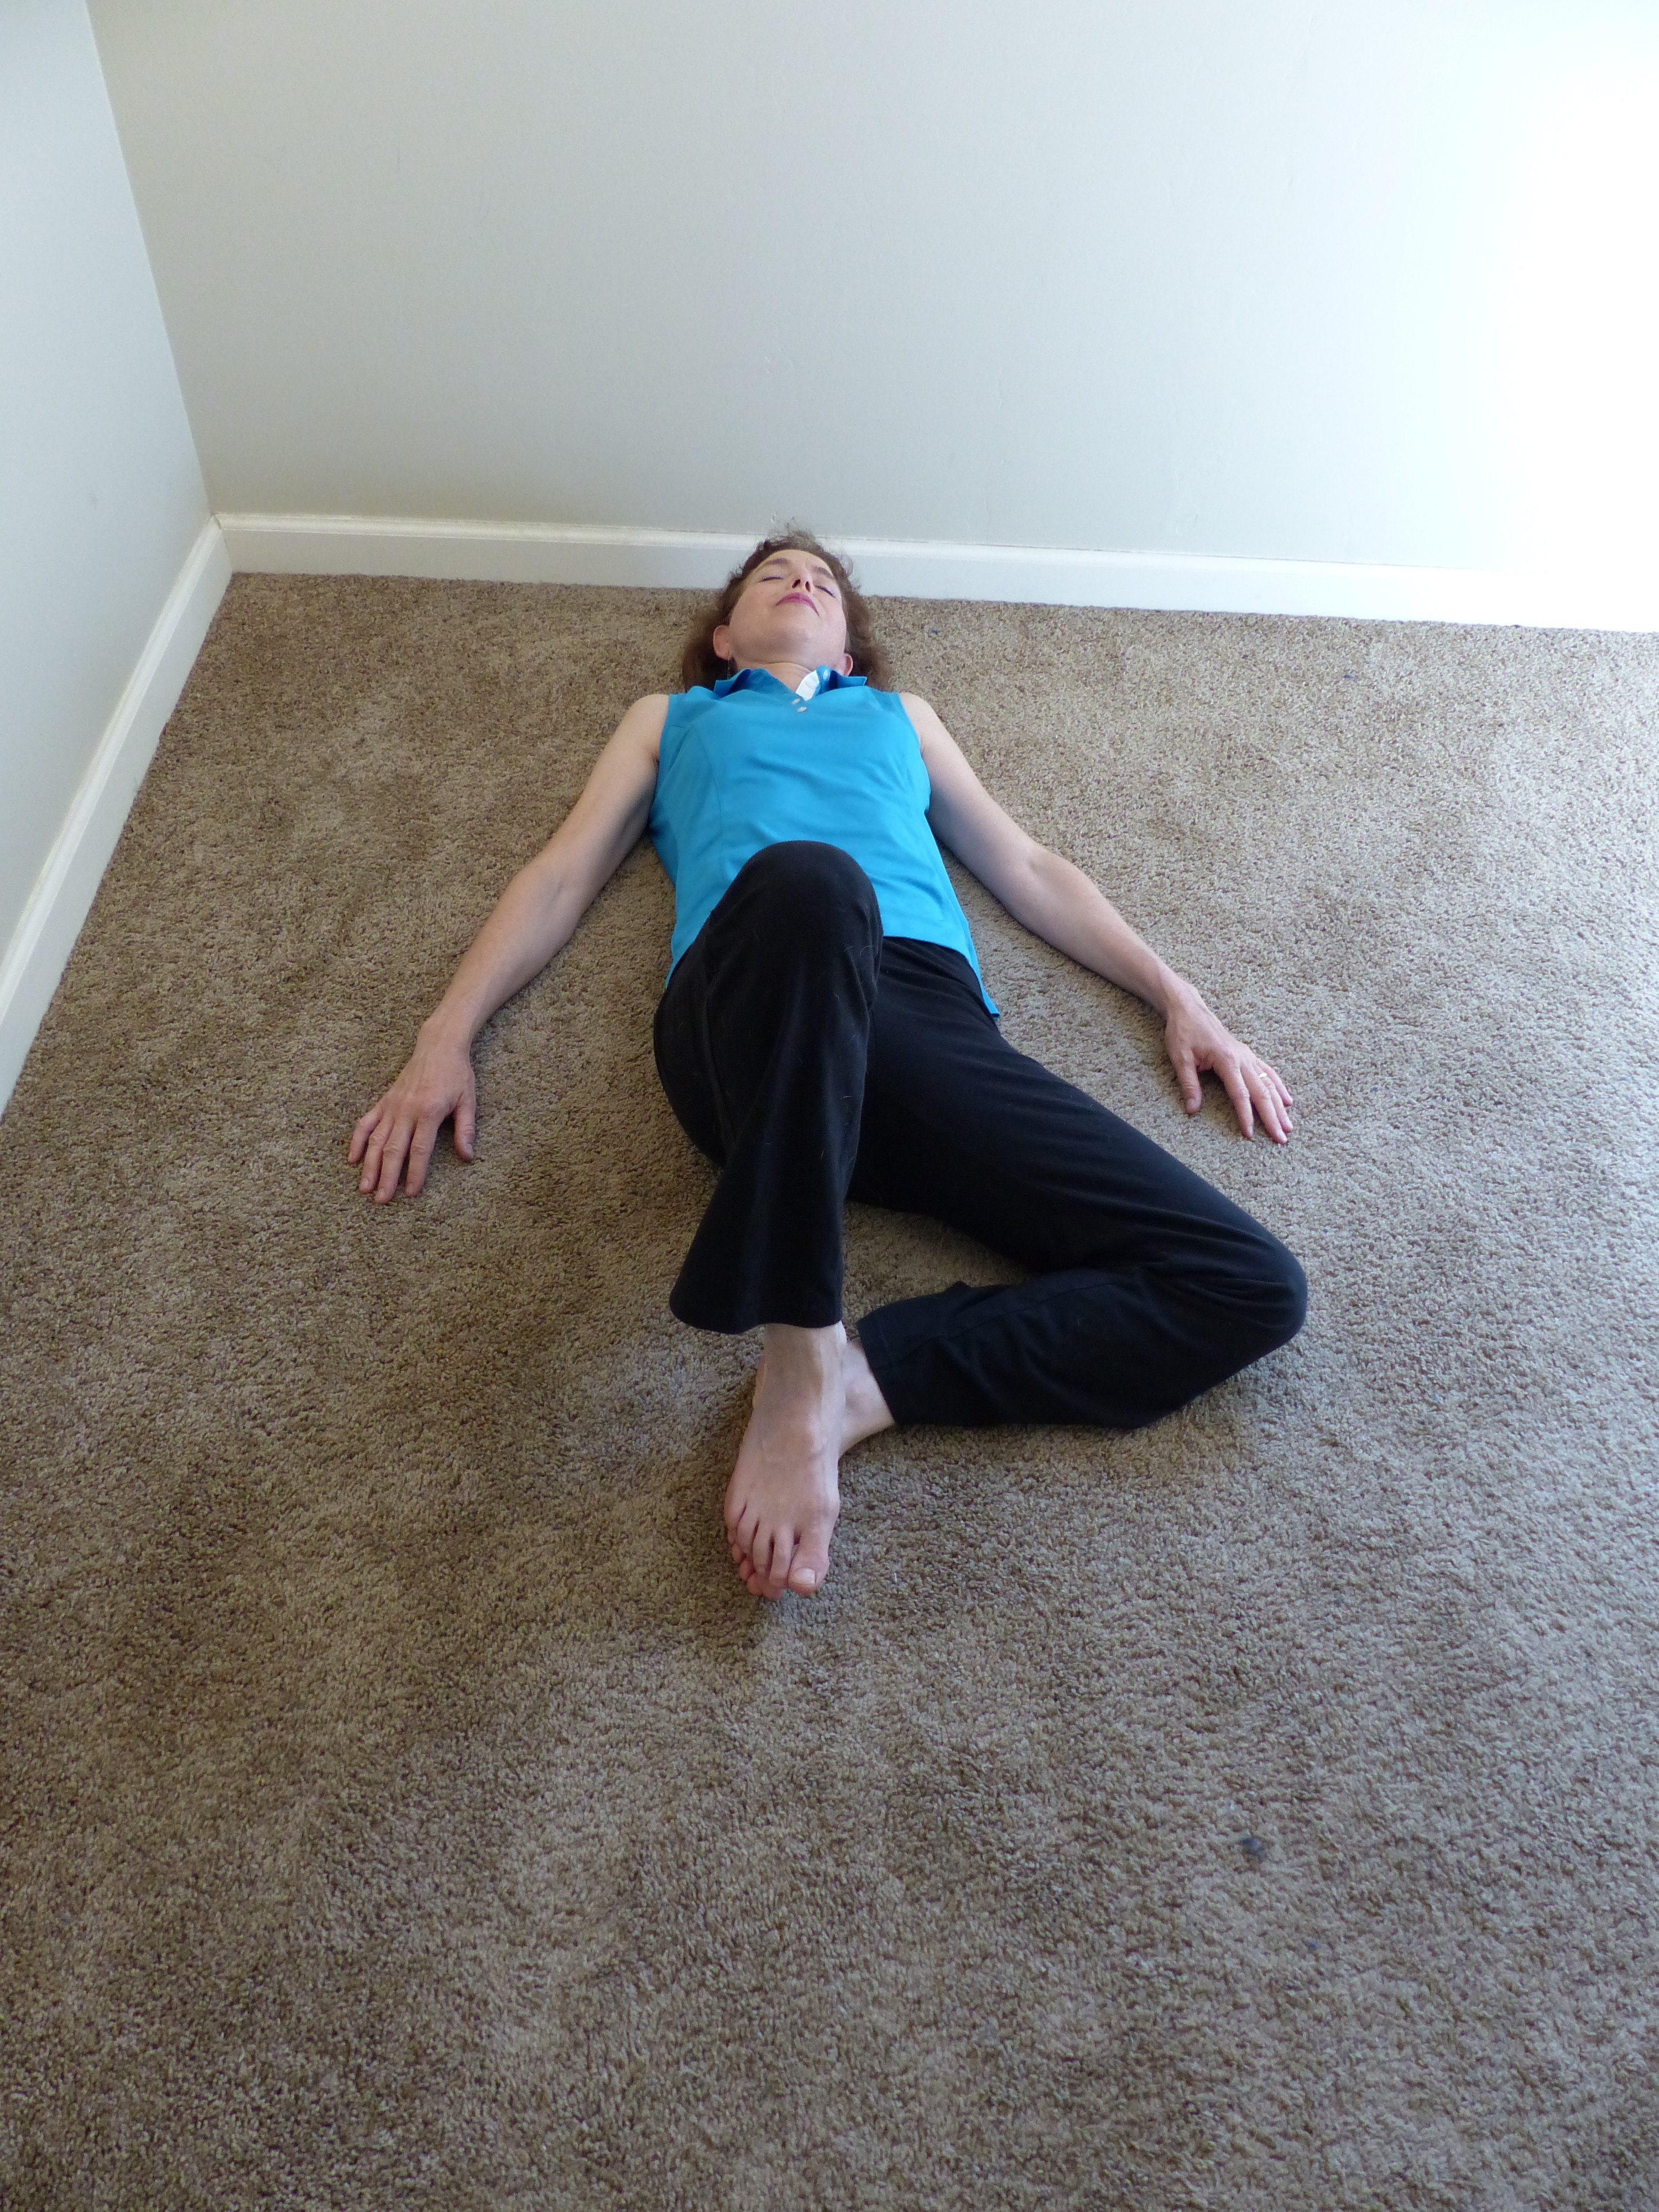 Human Exercise 2 - Improve Your Walking by Lying Down | Debono Moves